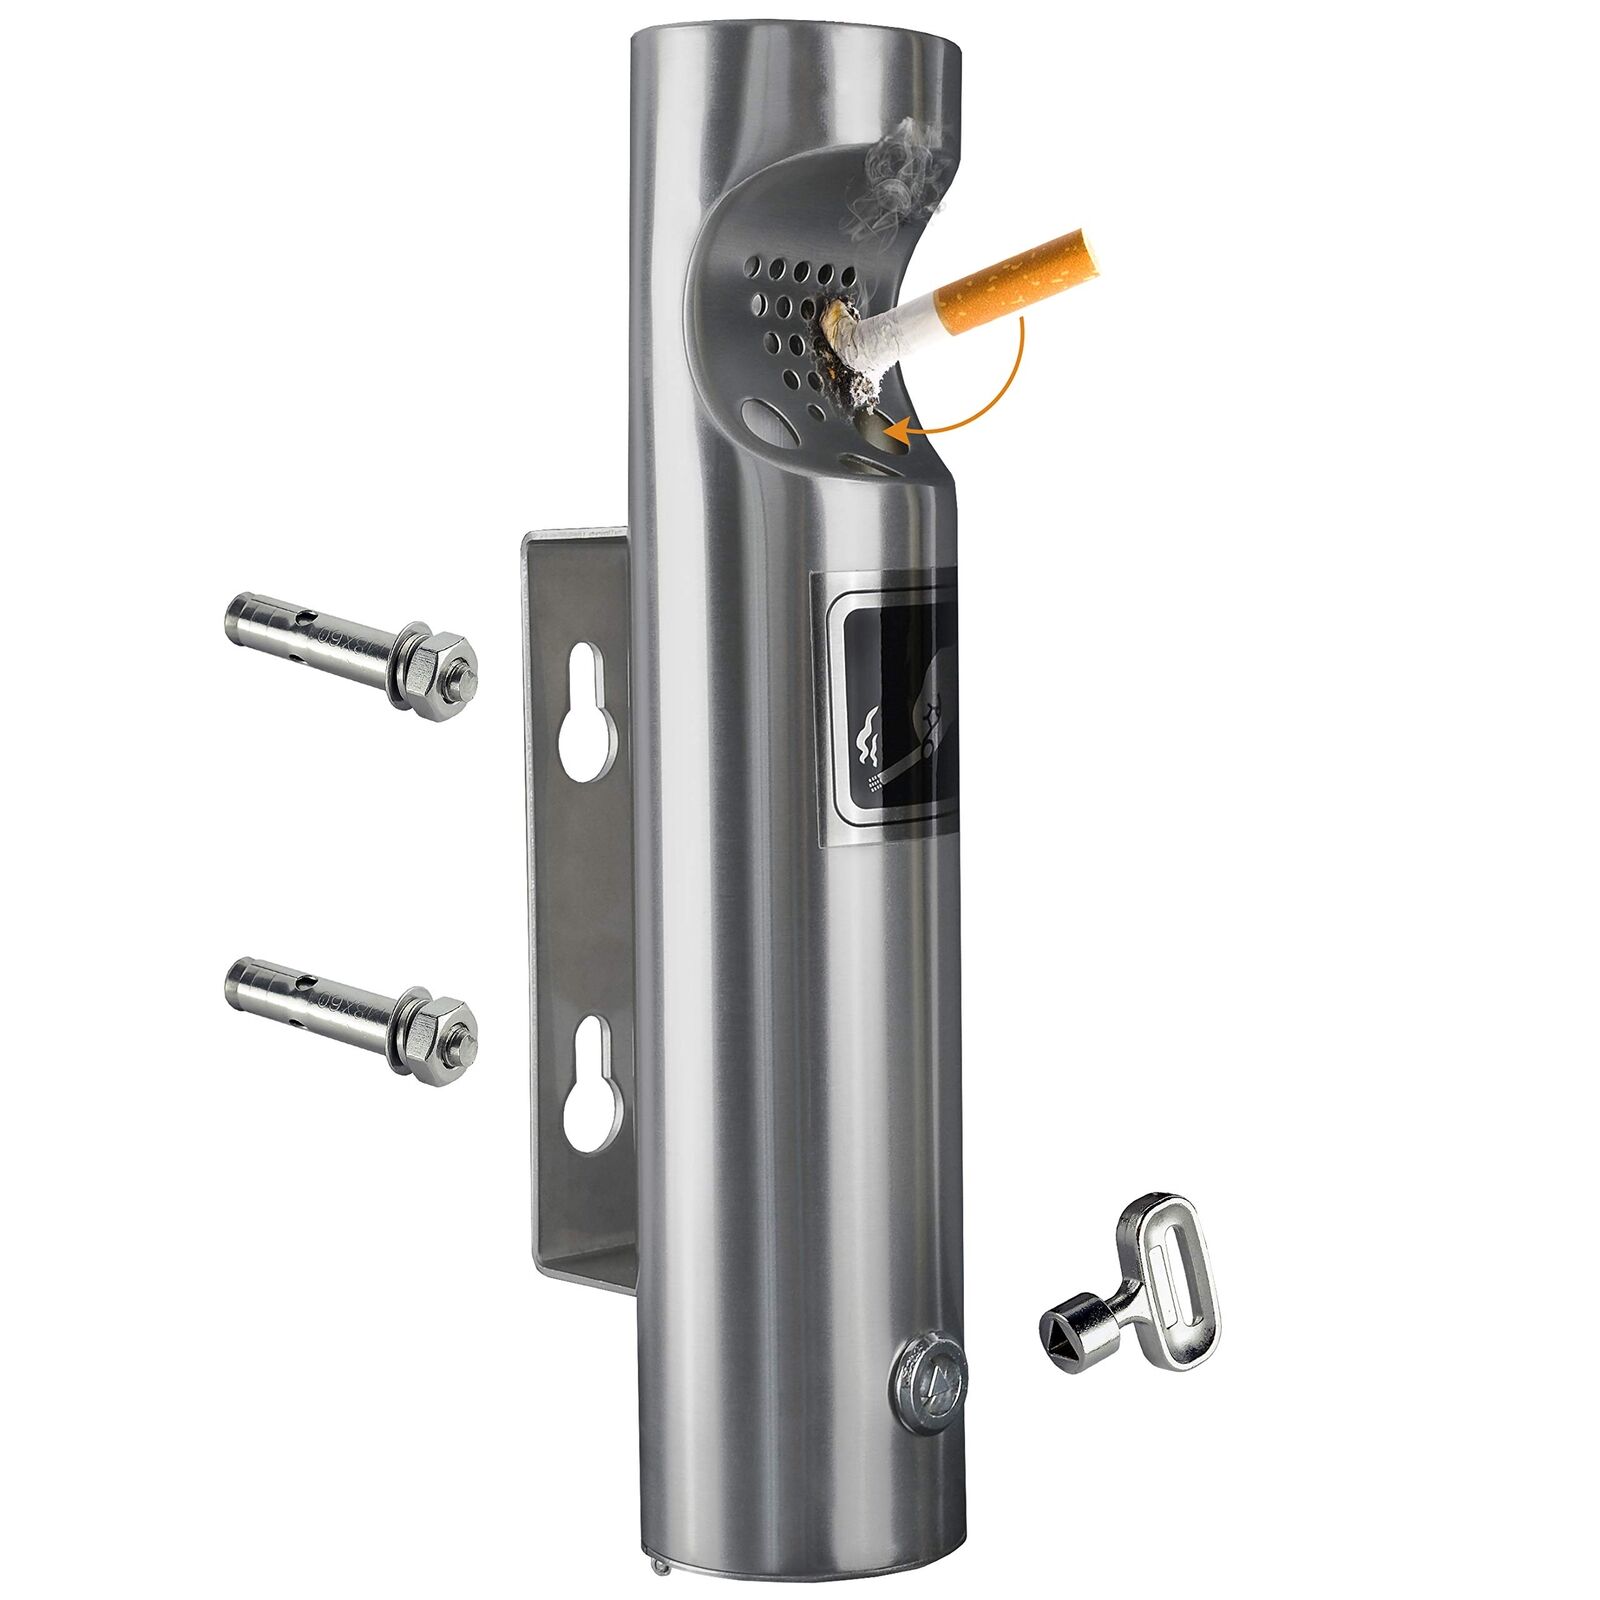 Wall Mounted Outdoor Cigarette Butt Receptacle (Silver)